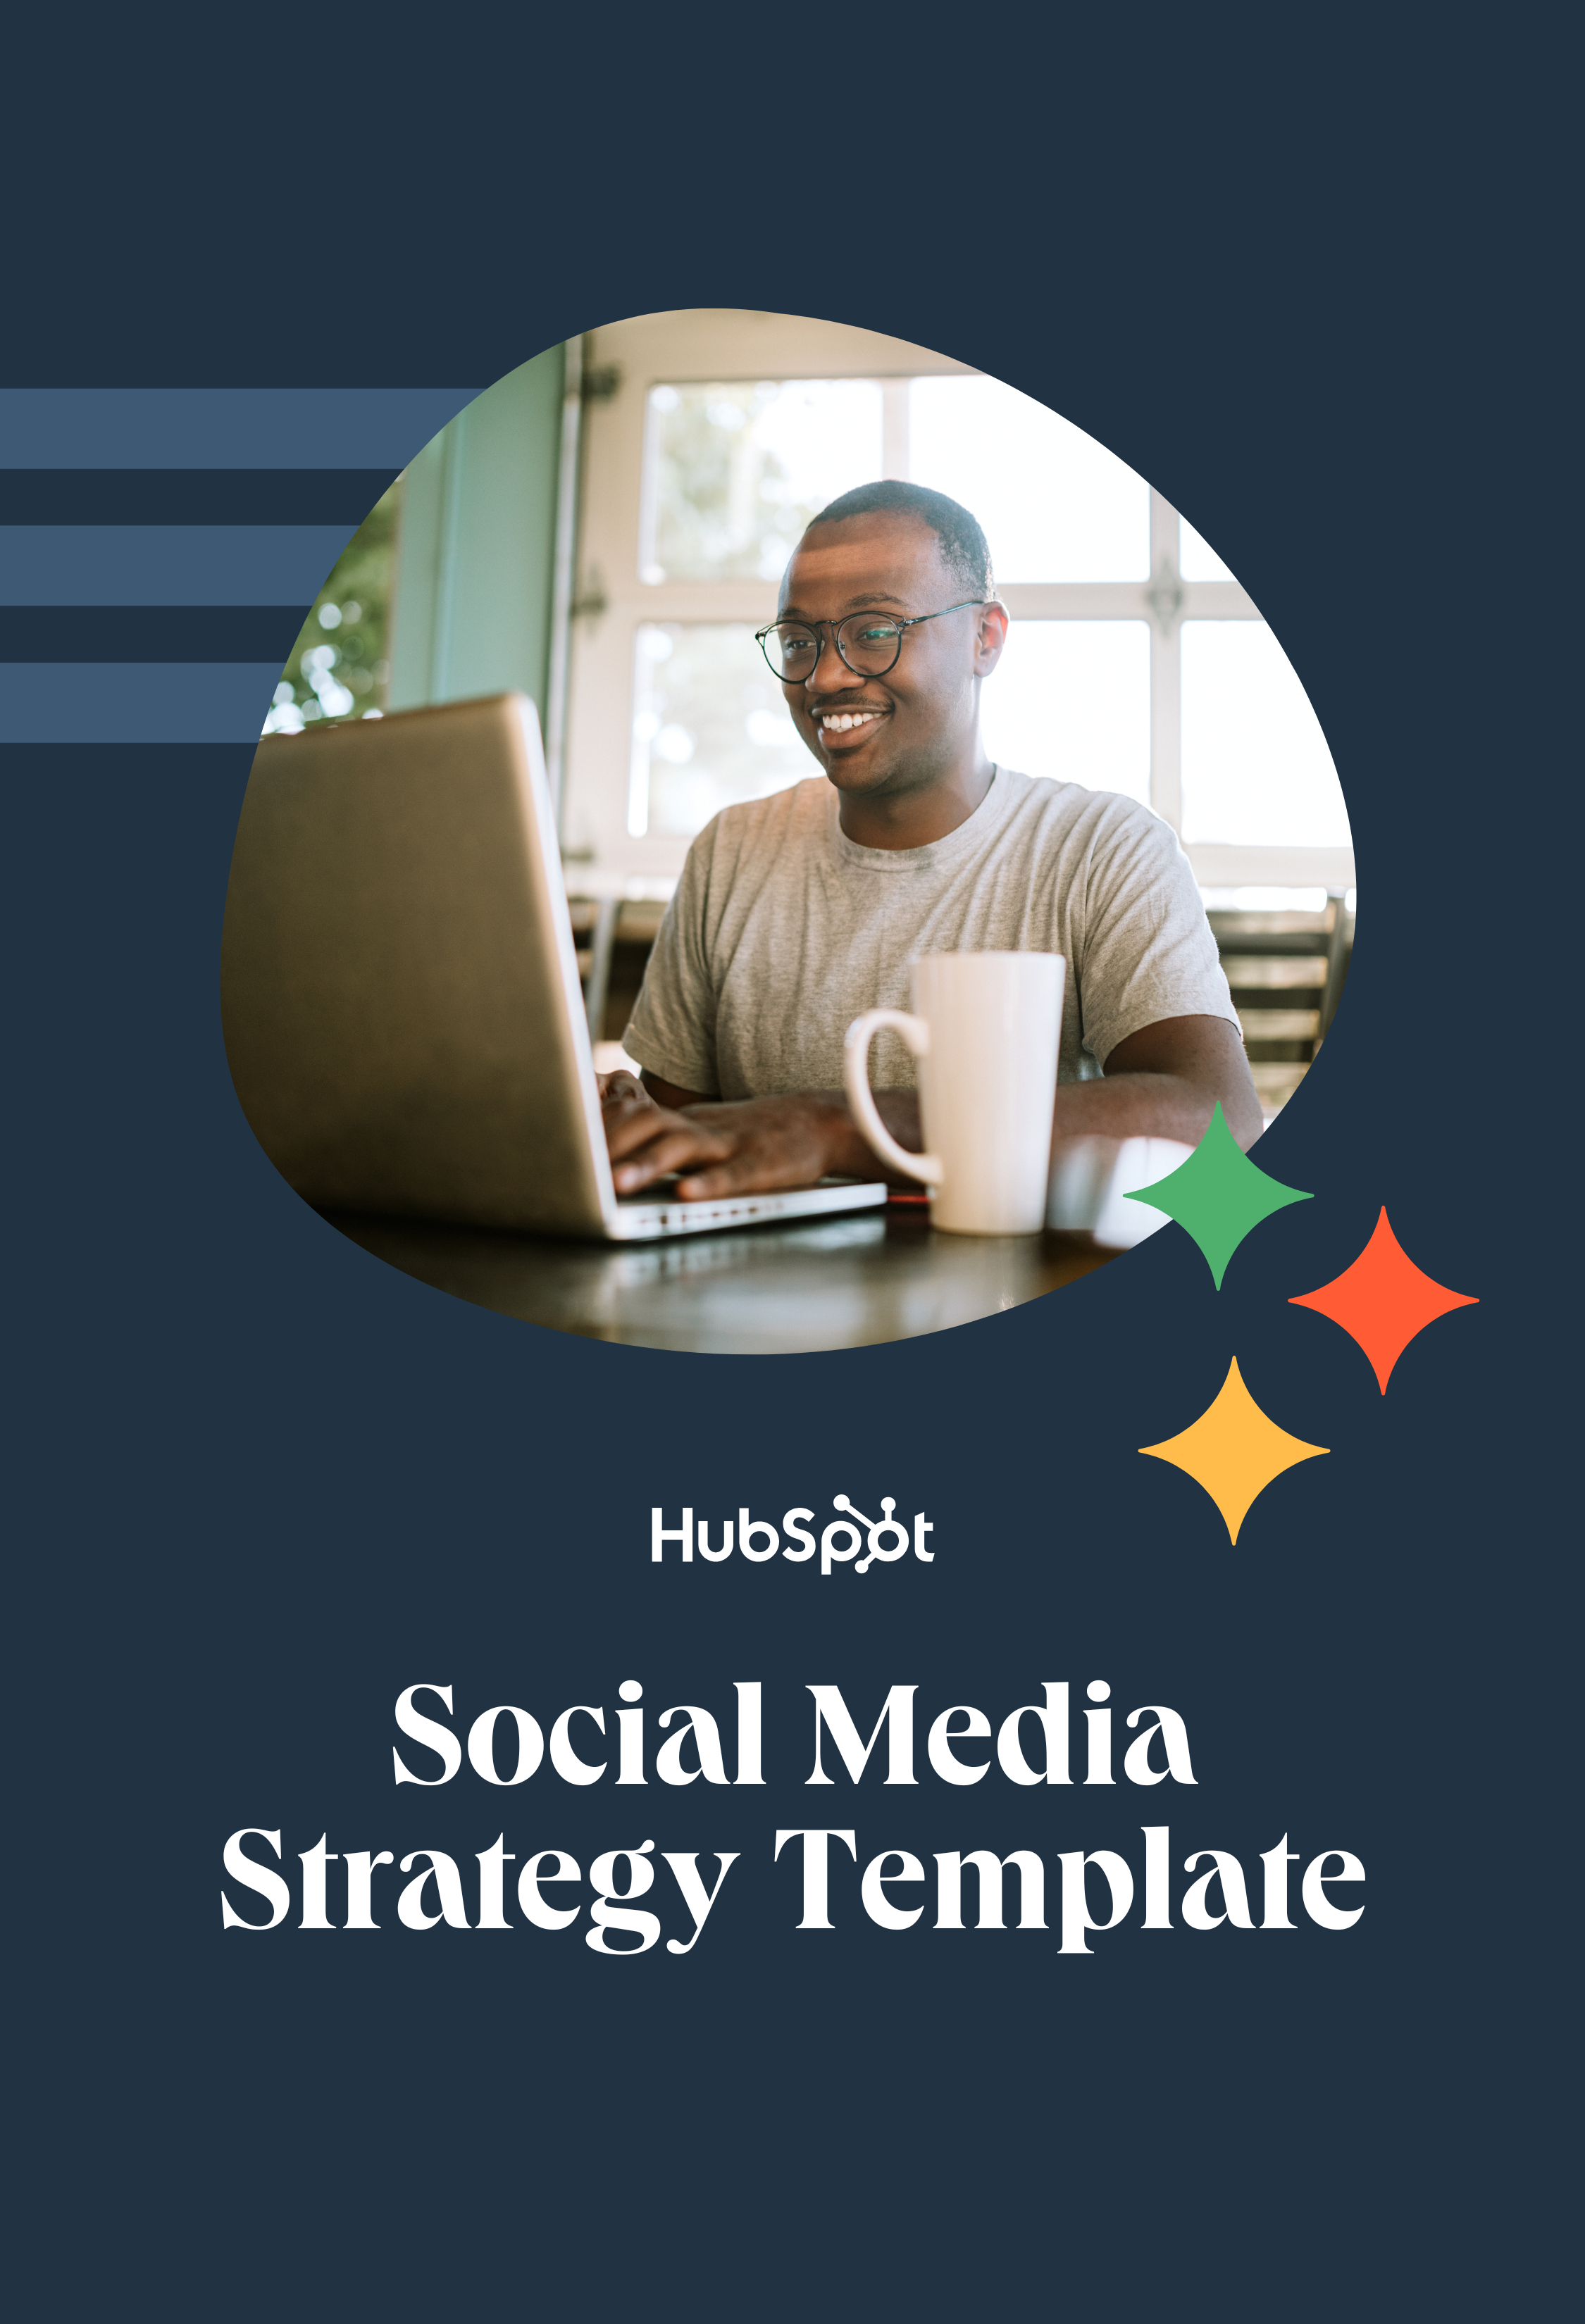 Social Media Strategy Template - ebook cover